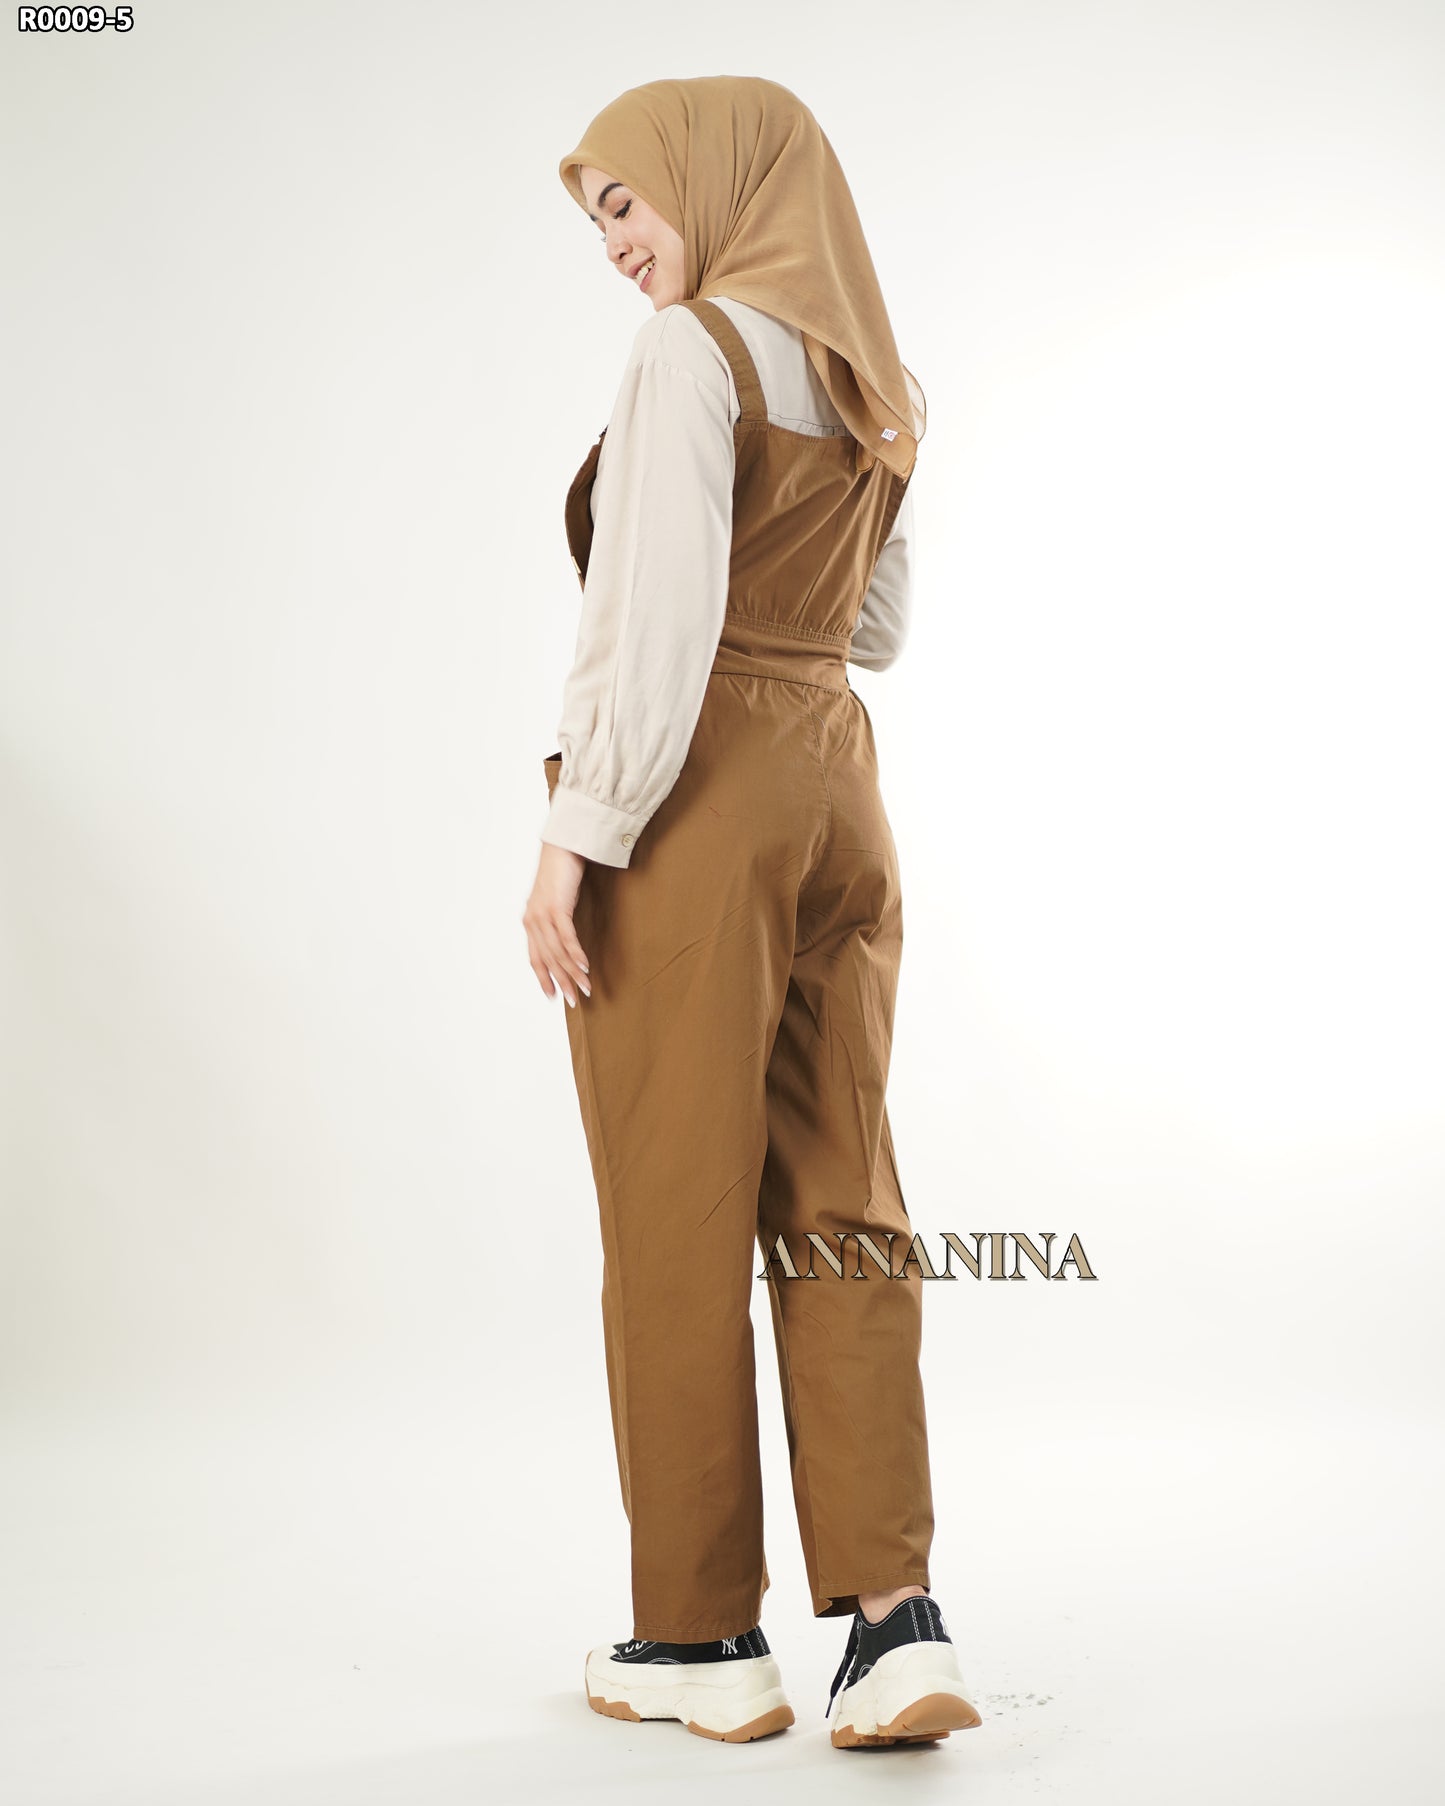 NMR Celana Jumpsuit Overall Baby Canvas Vol R0009-5